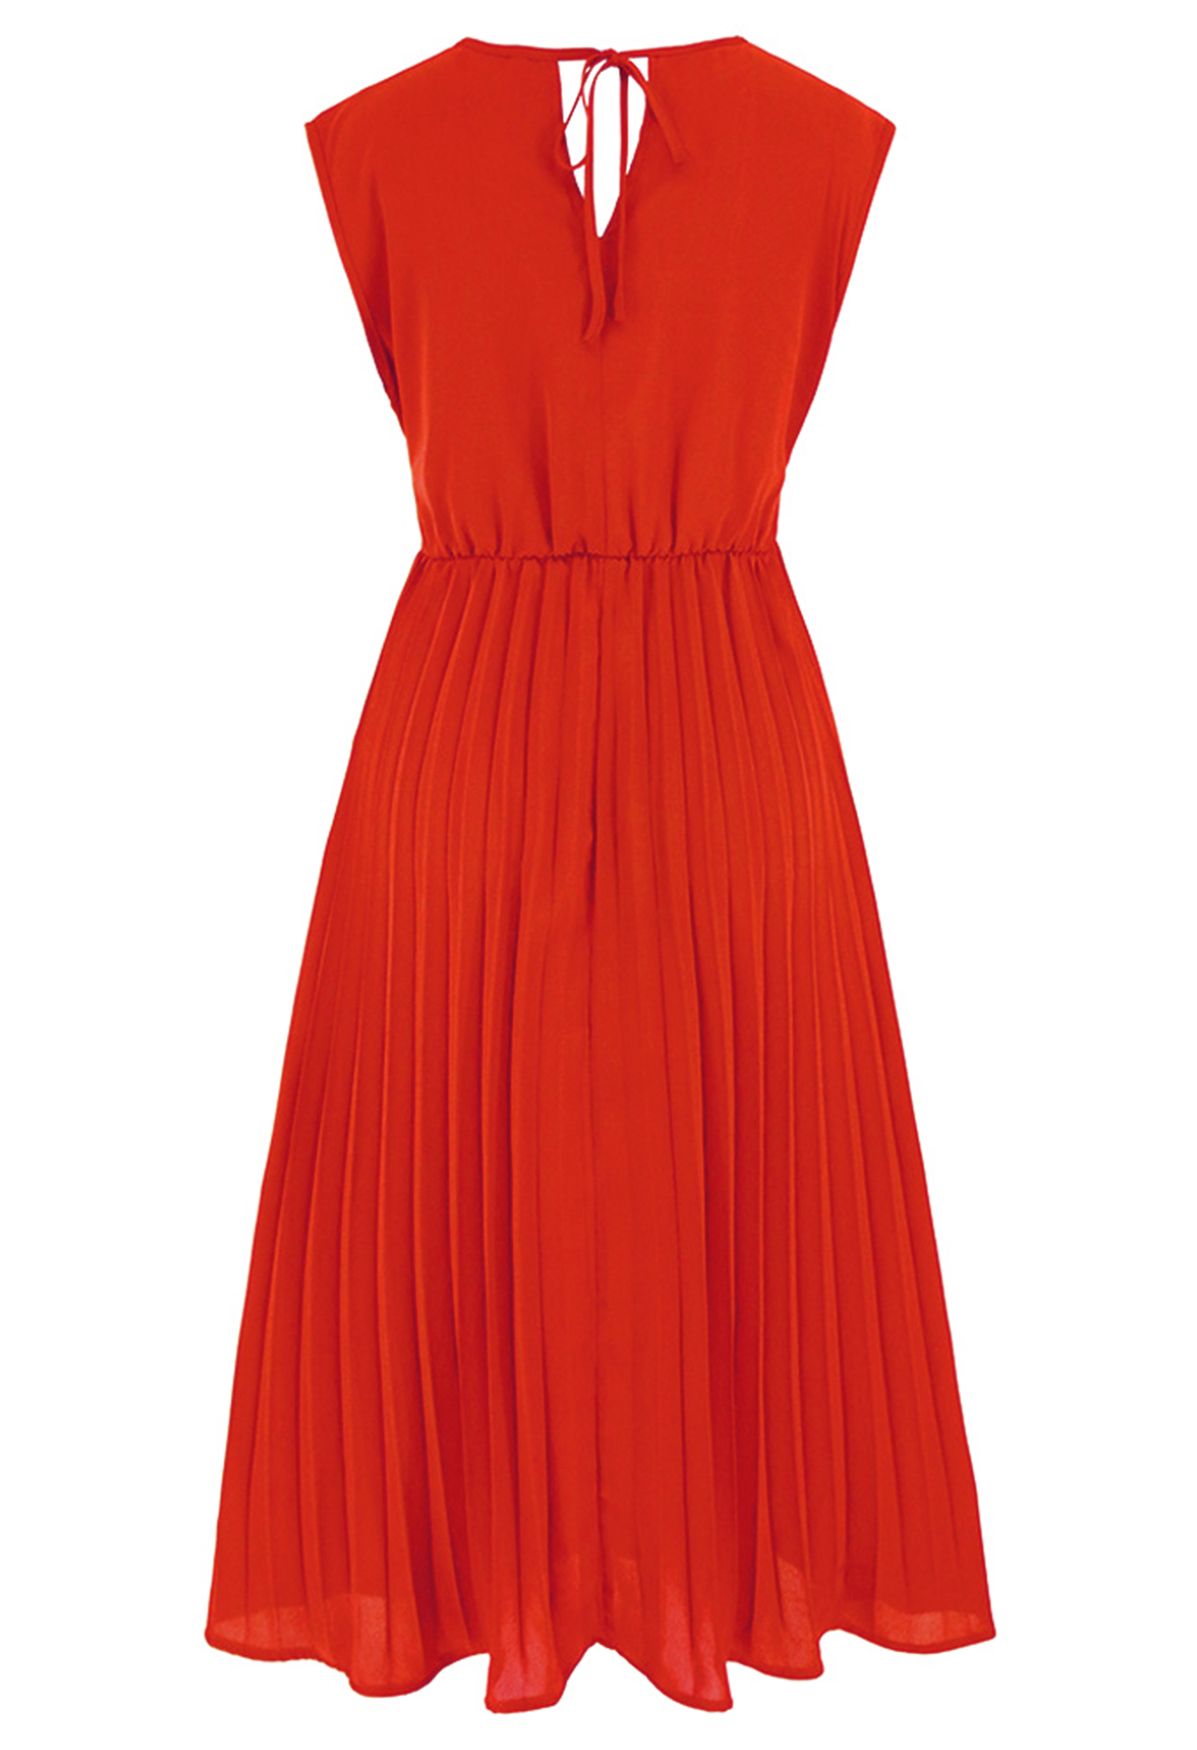 Orange Floral Cut Out Back Pleated Satin Dress - Retro, Indie and Unique  Fashion